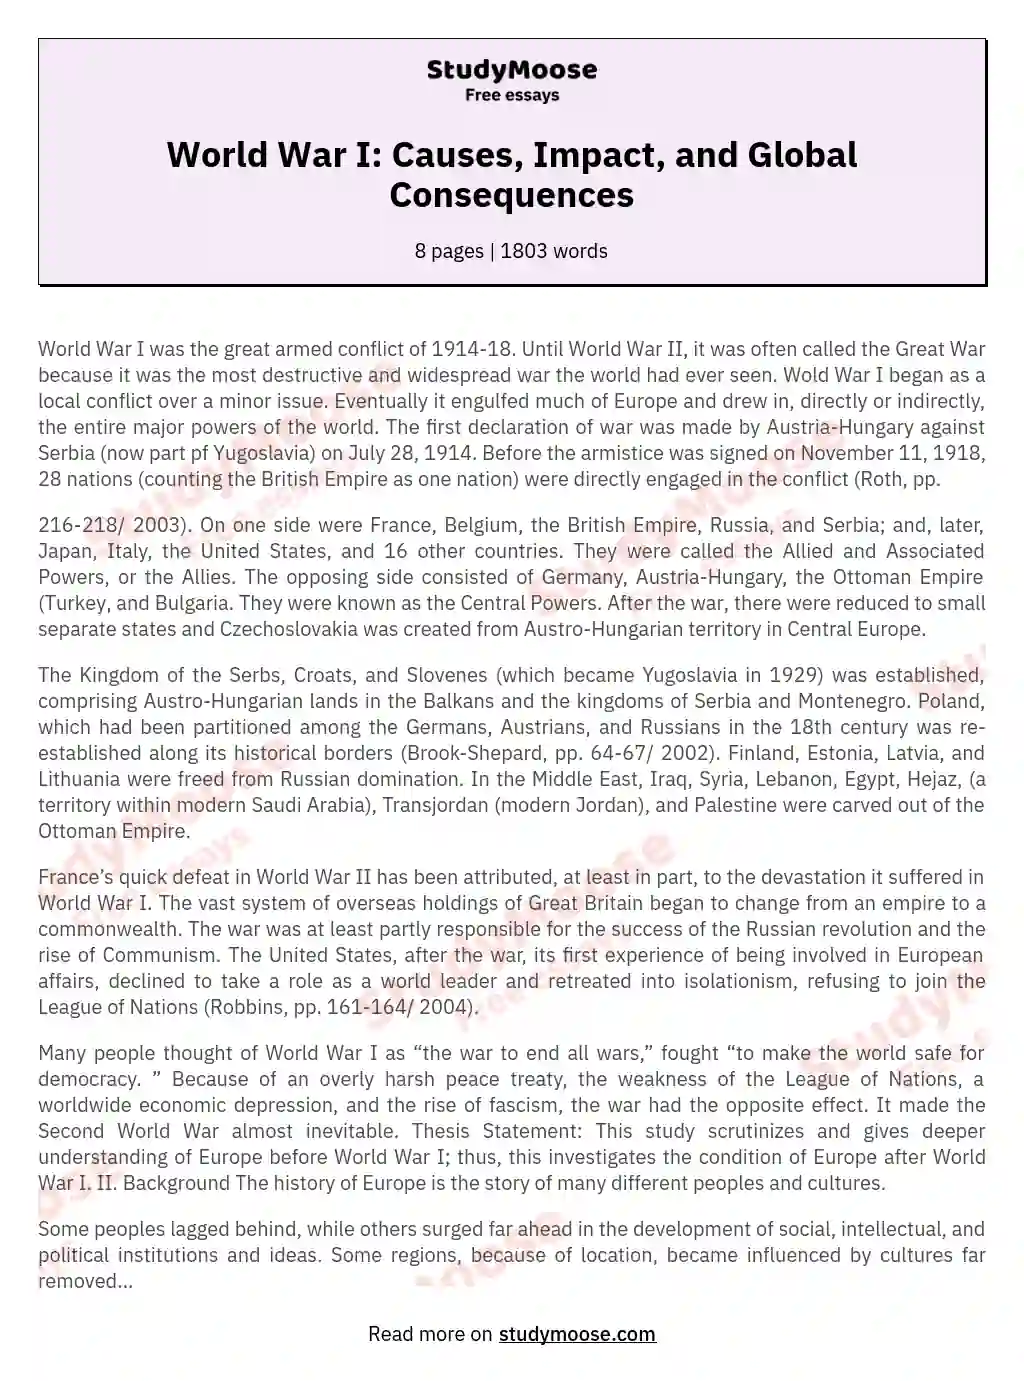 World War I: Causes, Impact, and Global Consequences essay